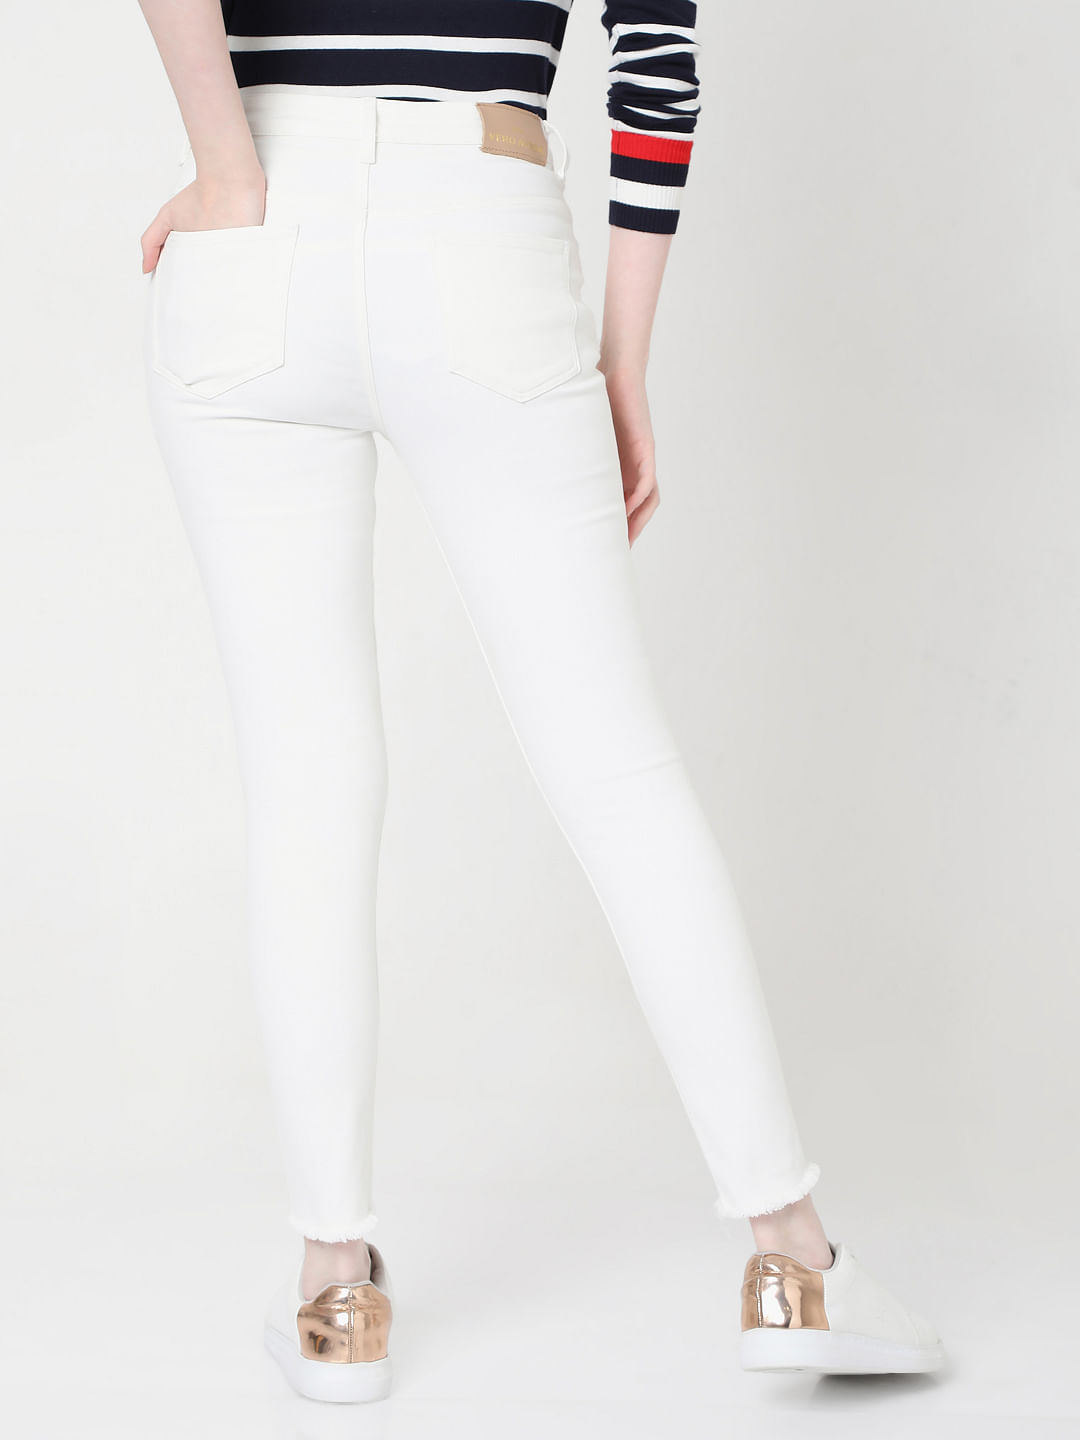 Womens White Ankle Jeans  Nordstrom